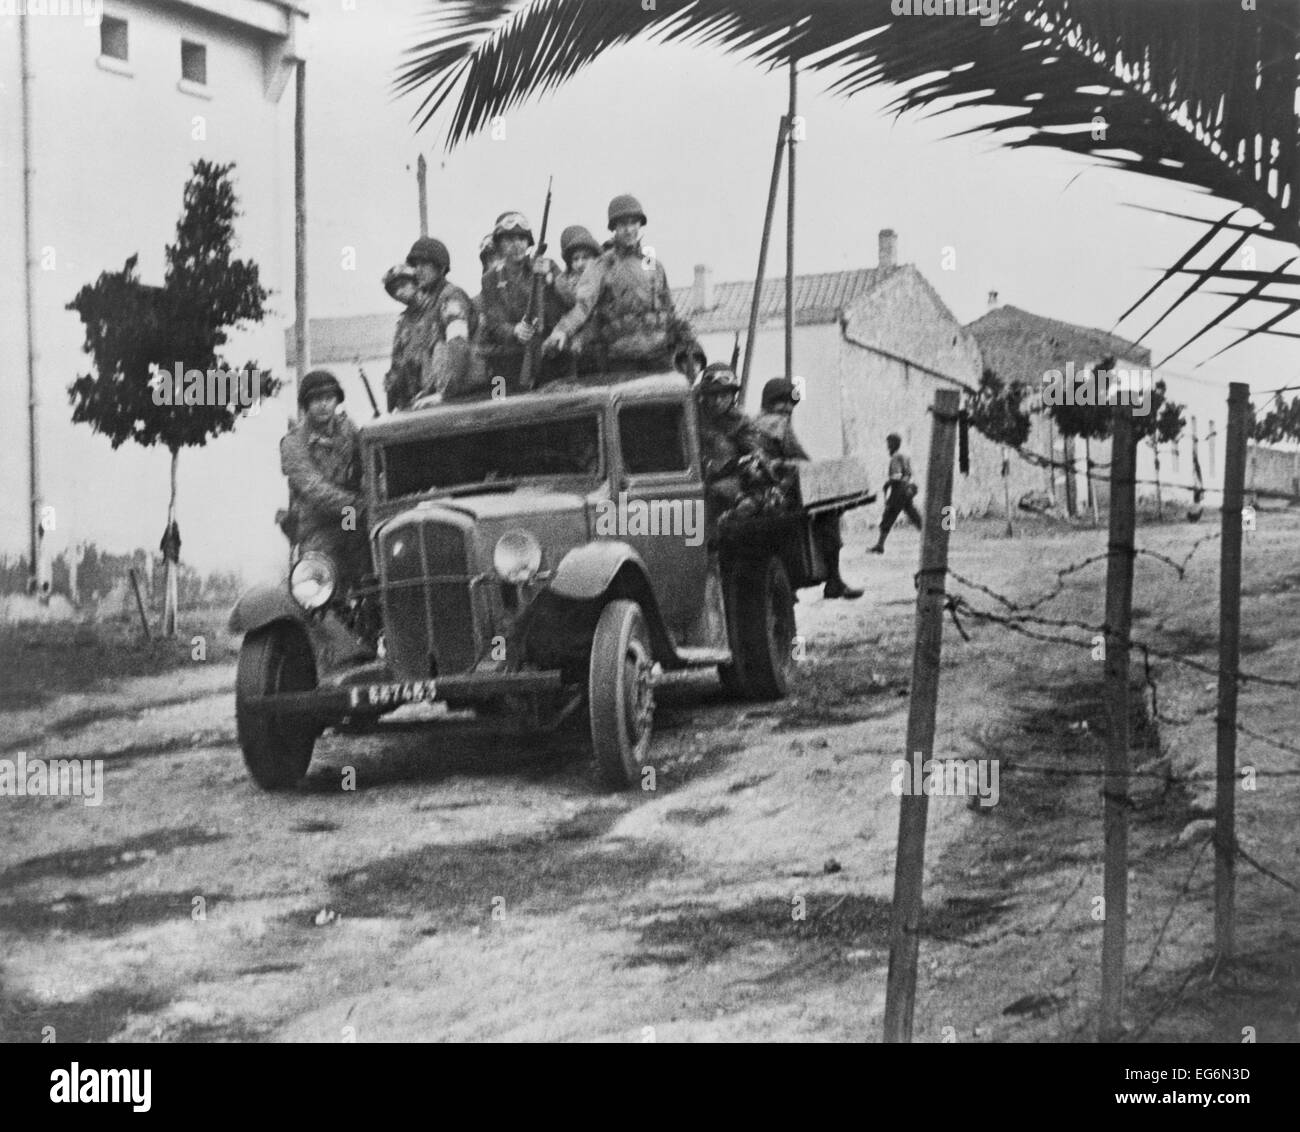 U.S. troops advancing in Oran, North Africa, Nov 18, 1942. They are part of the Central Task Force of Operation Torch that Stock Photo